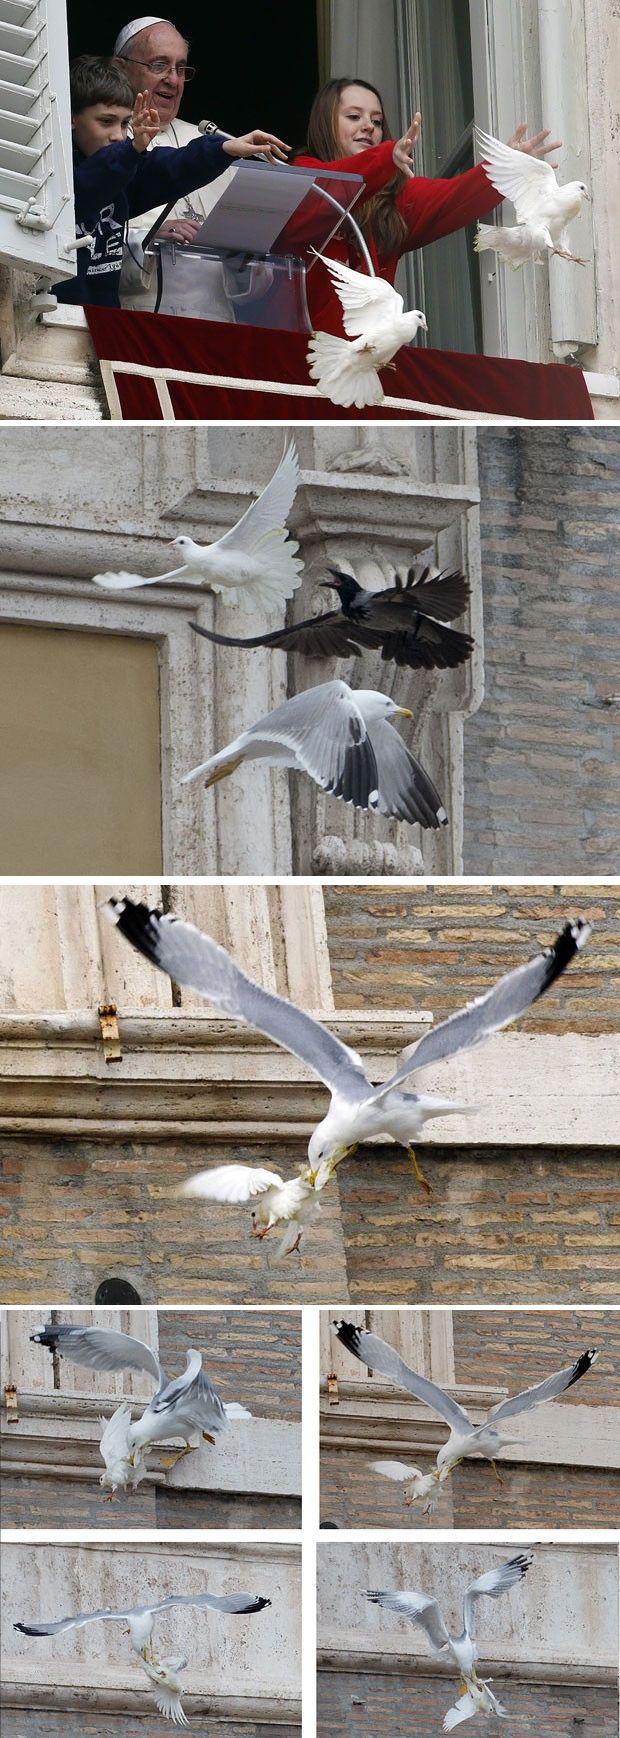 Pope's Dove of Peace Attacked by Seagulls Again